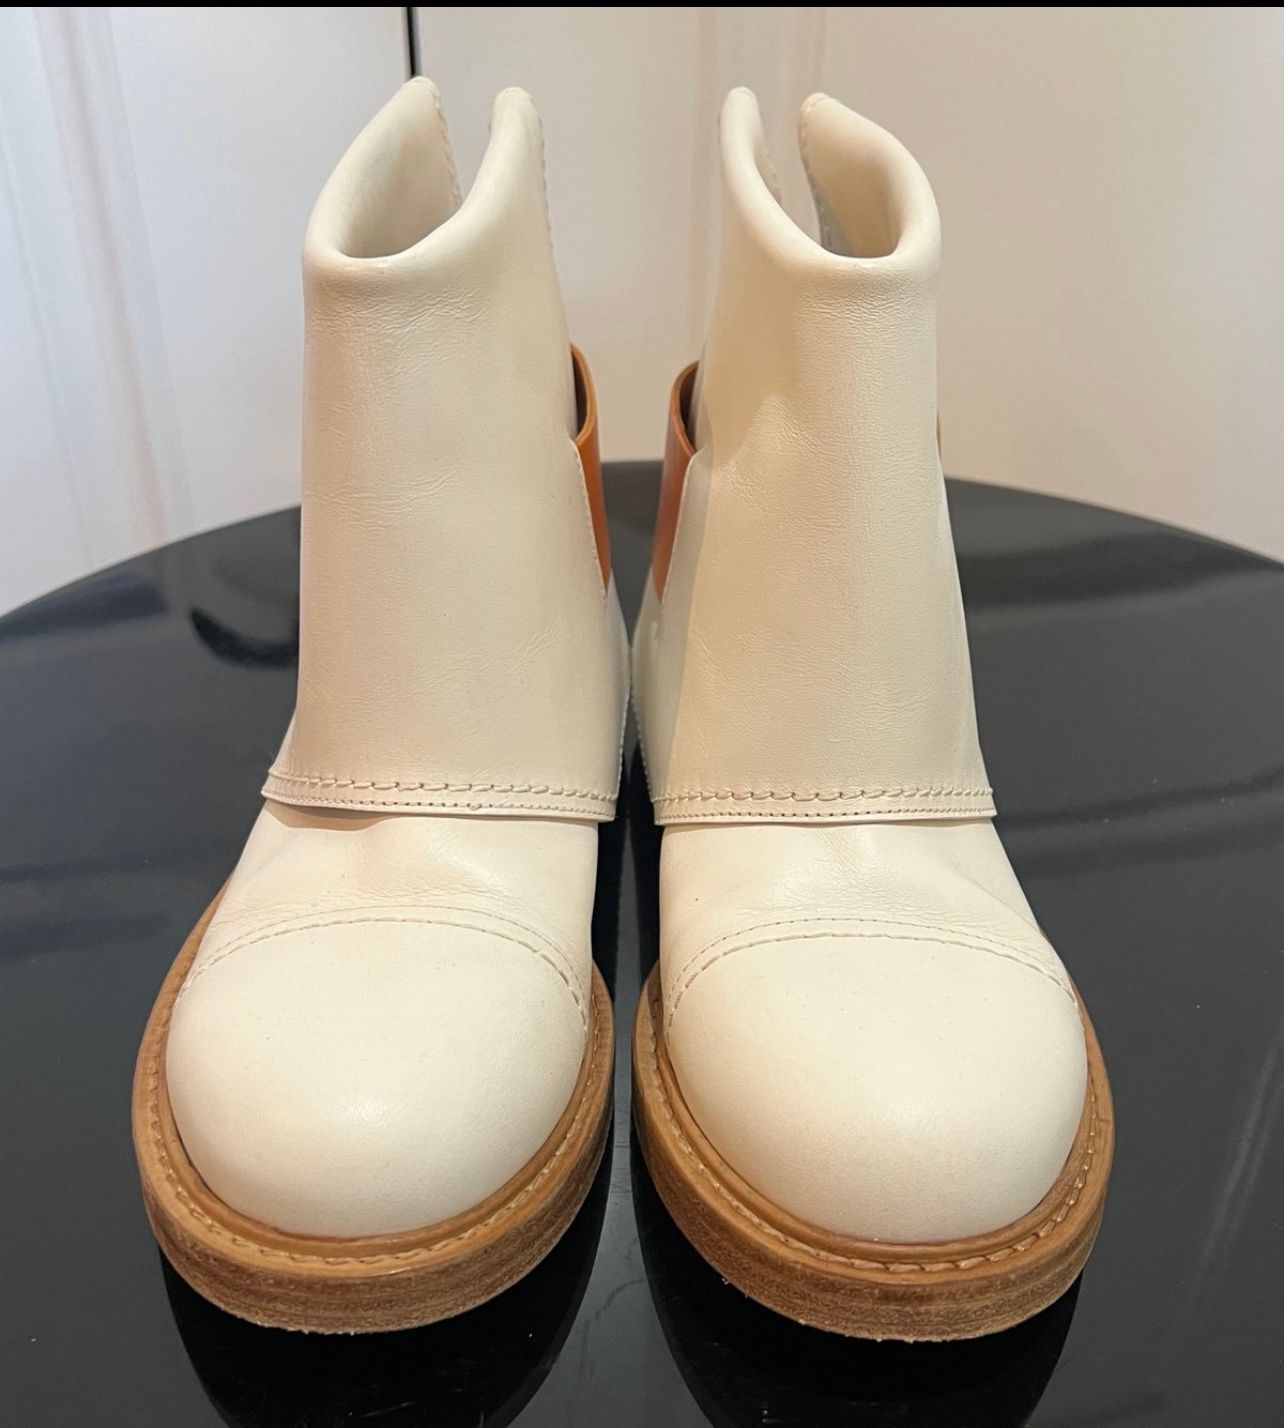 Alexander McQueen Leather Boots Size 8.0